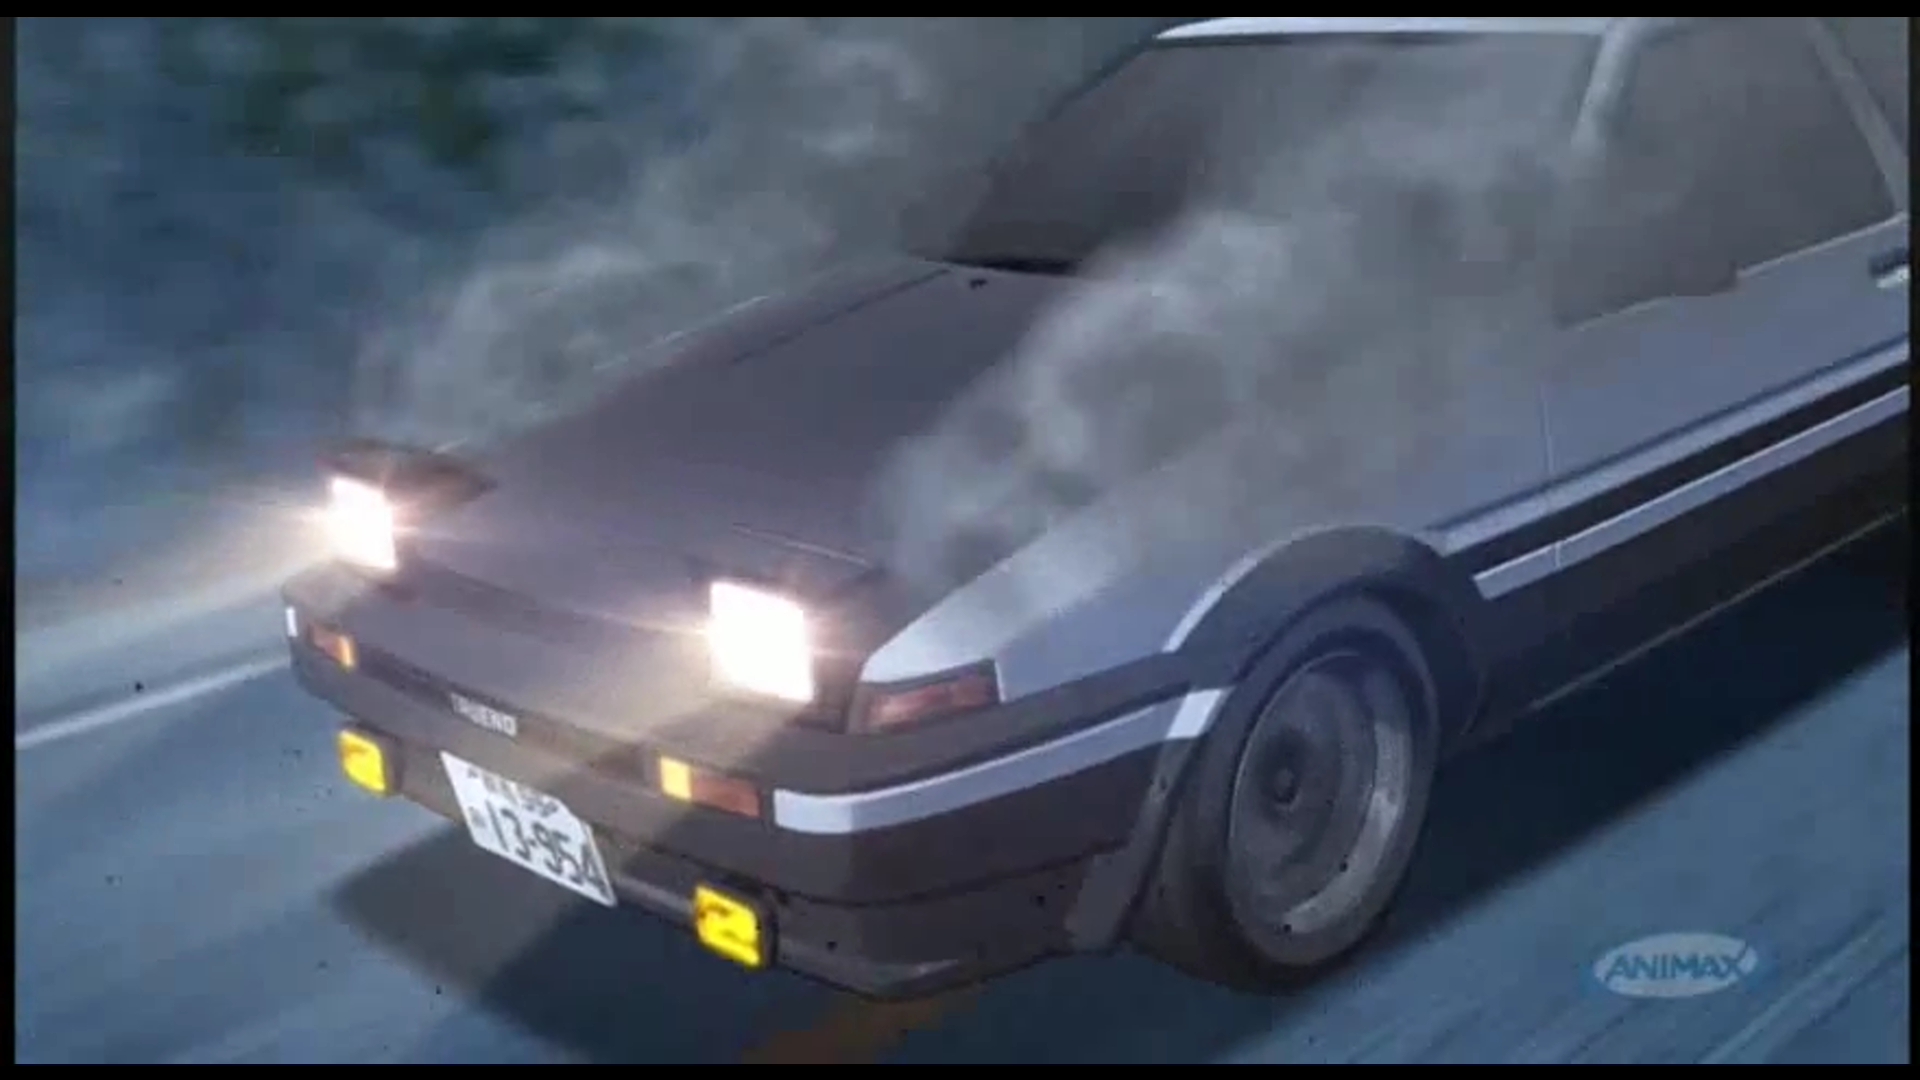 Initial D Final Stage Wallpapers Anime Hq Initial D Final Stage Pictures 4k Wallpapers 19